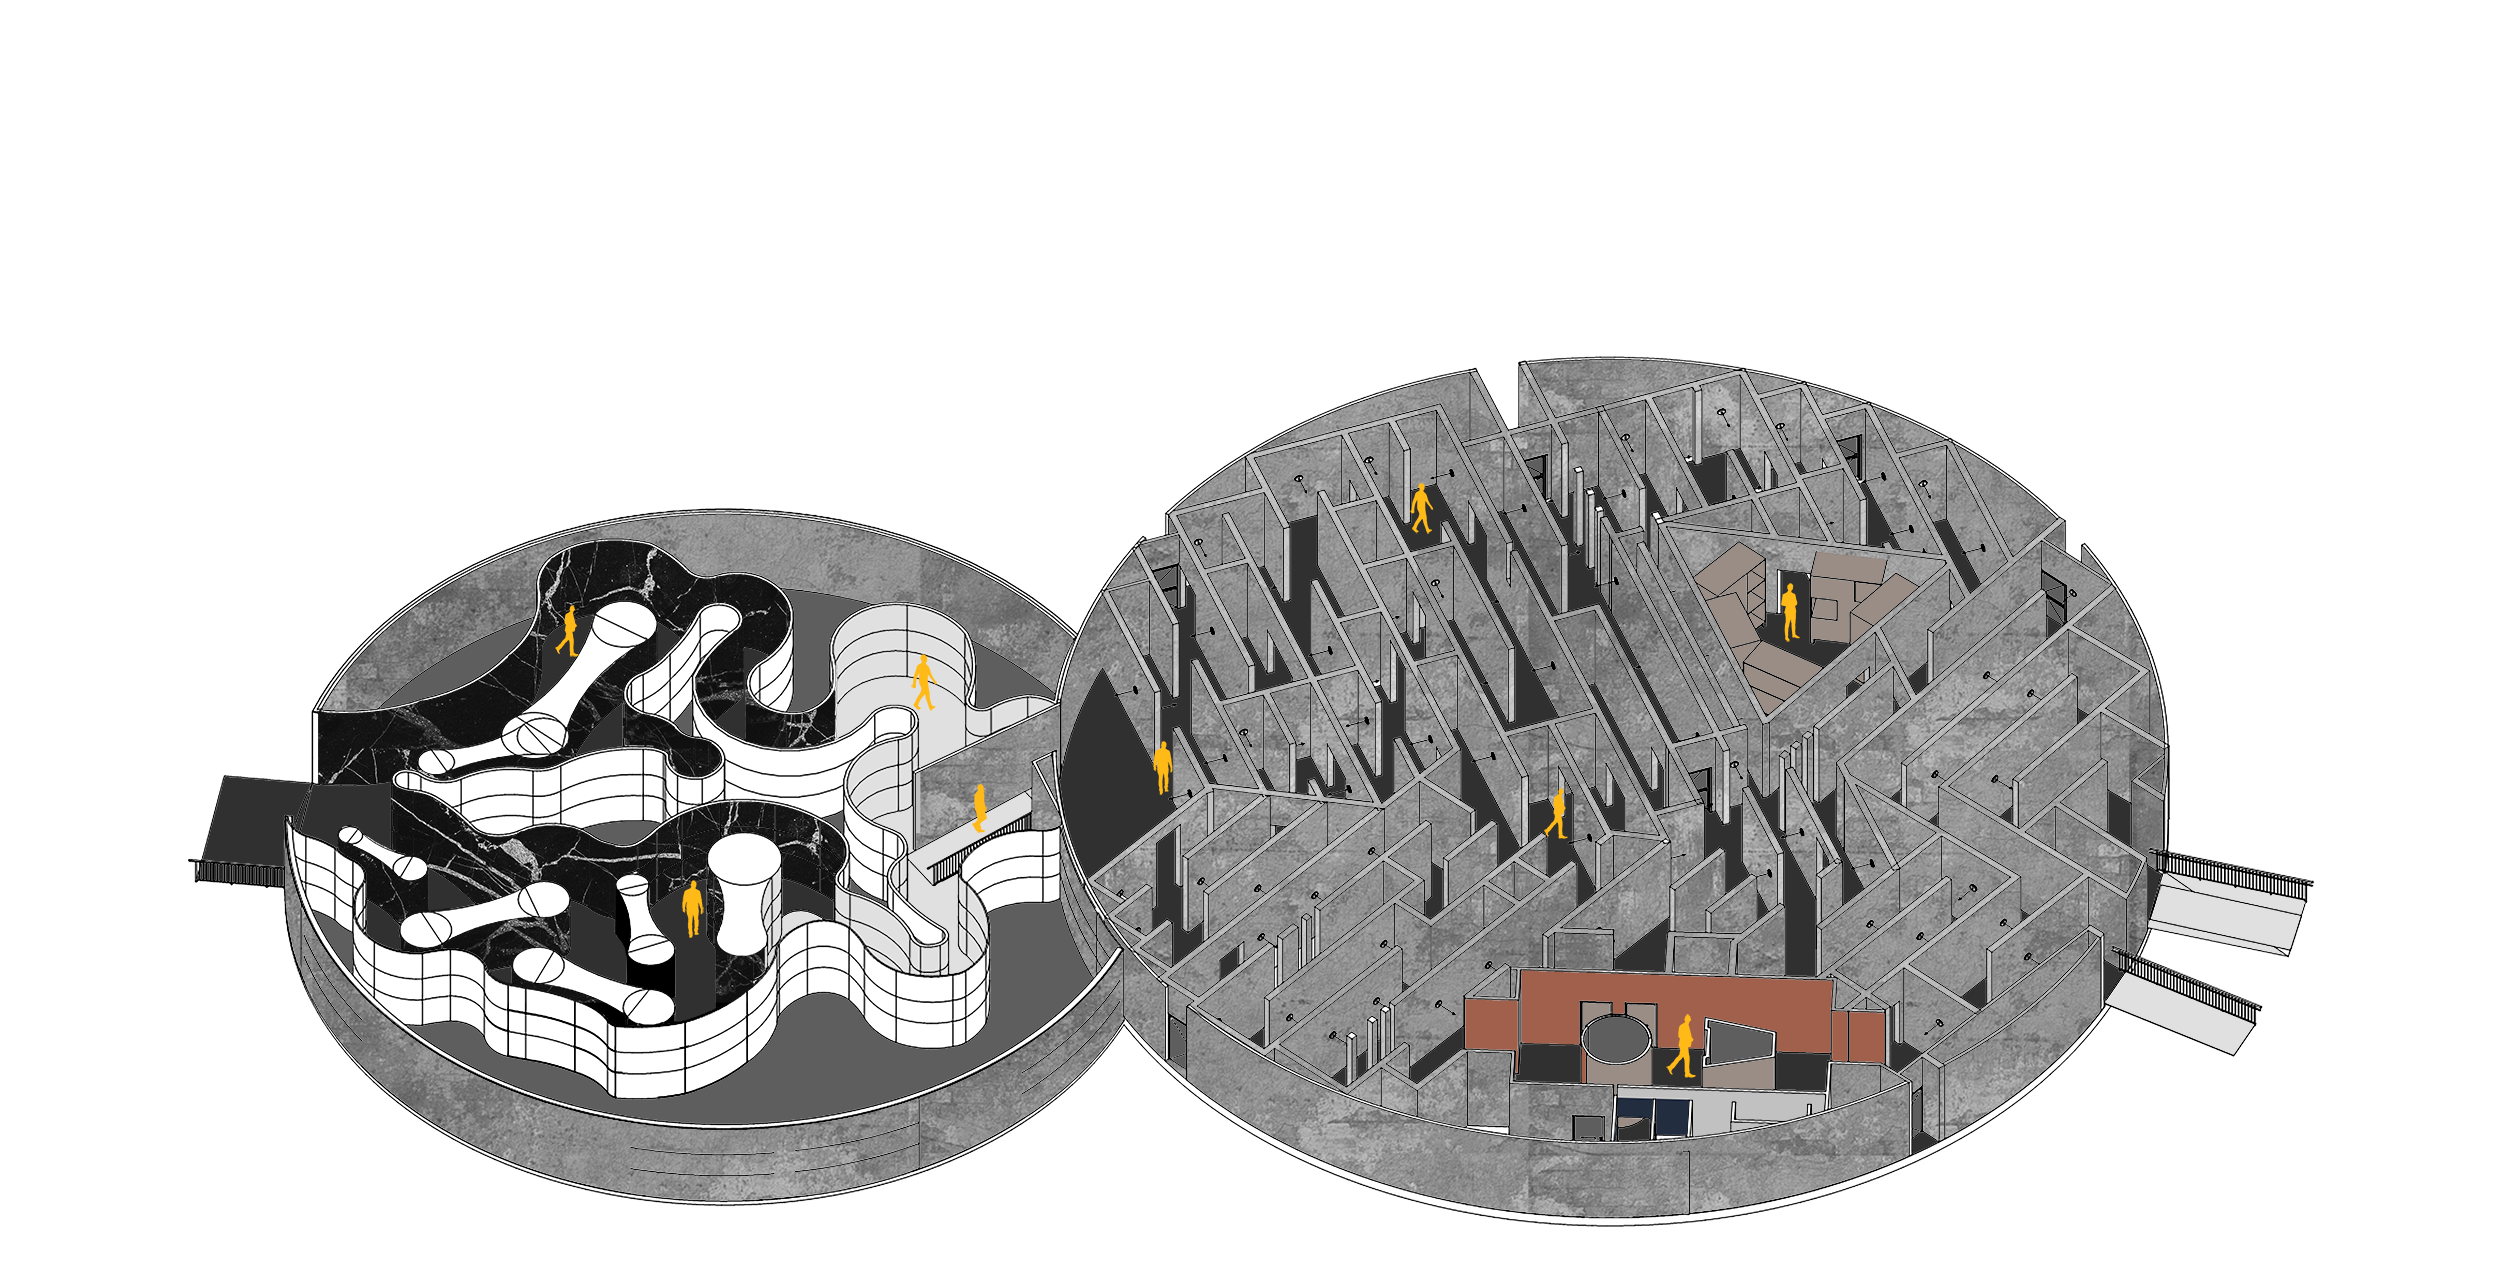 Overview of a a circular maze concept, looking into the dystopian maze and the journey through it.